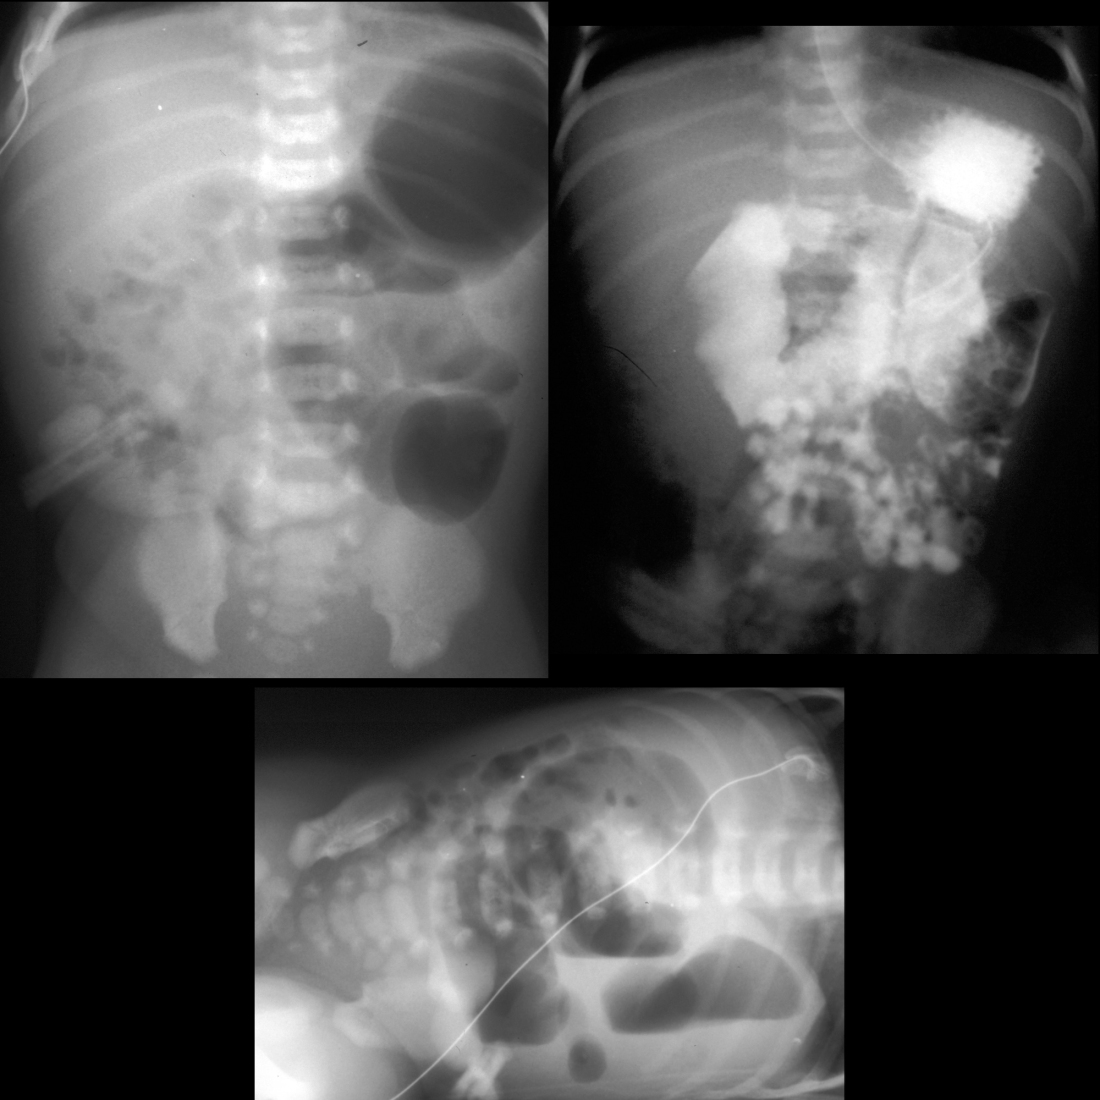 Newborn with polyhydramnios on prenatal US and bilious vomiting